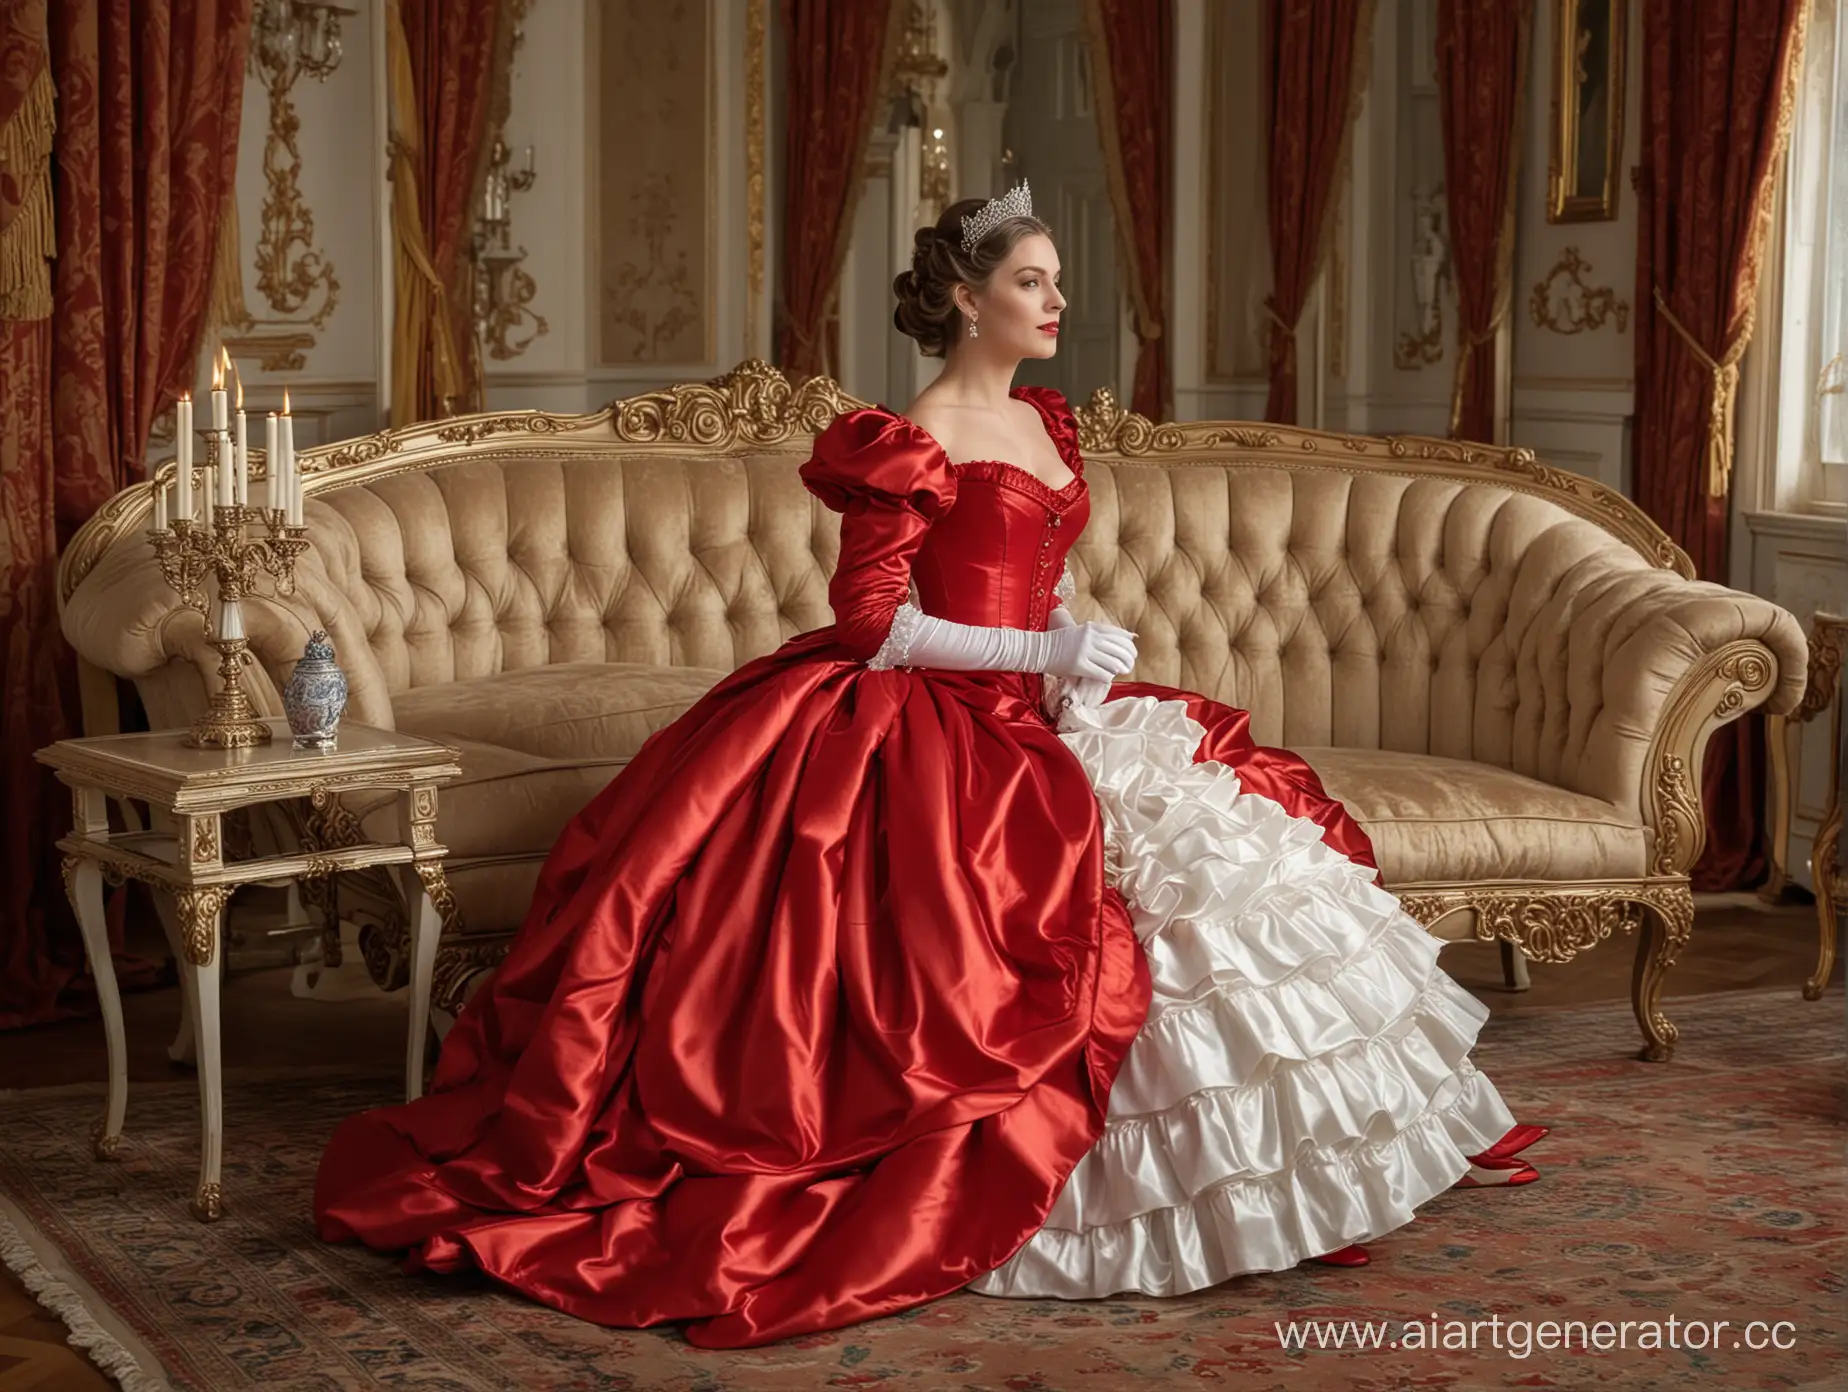 Regal-Empress-in-Crimson-Opulent-Dress-and-Sunny-Ambiance